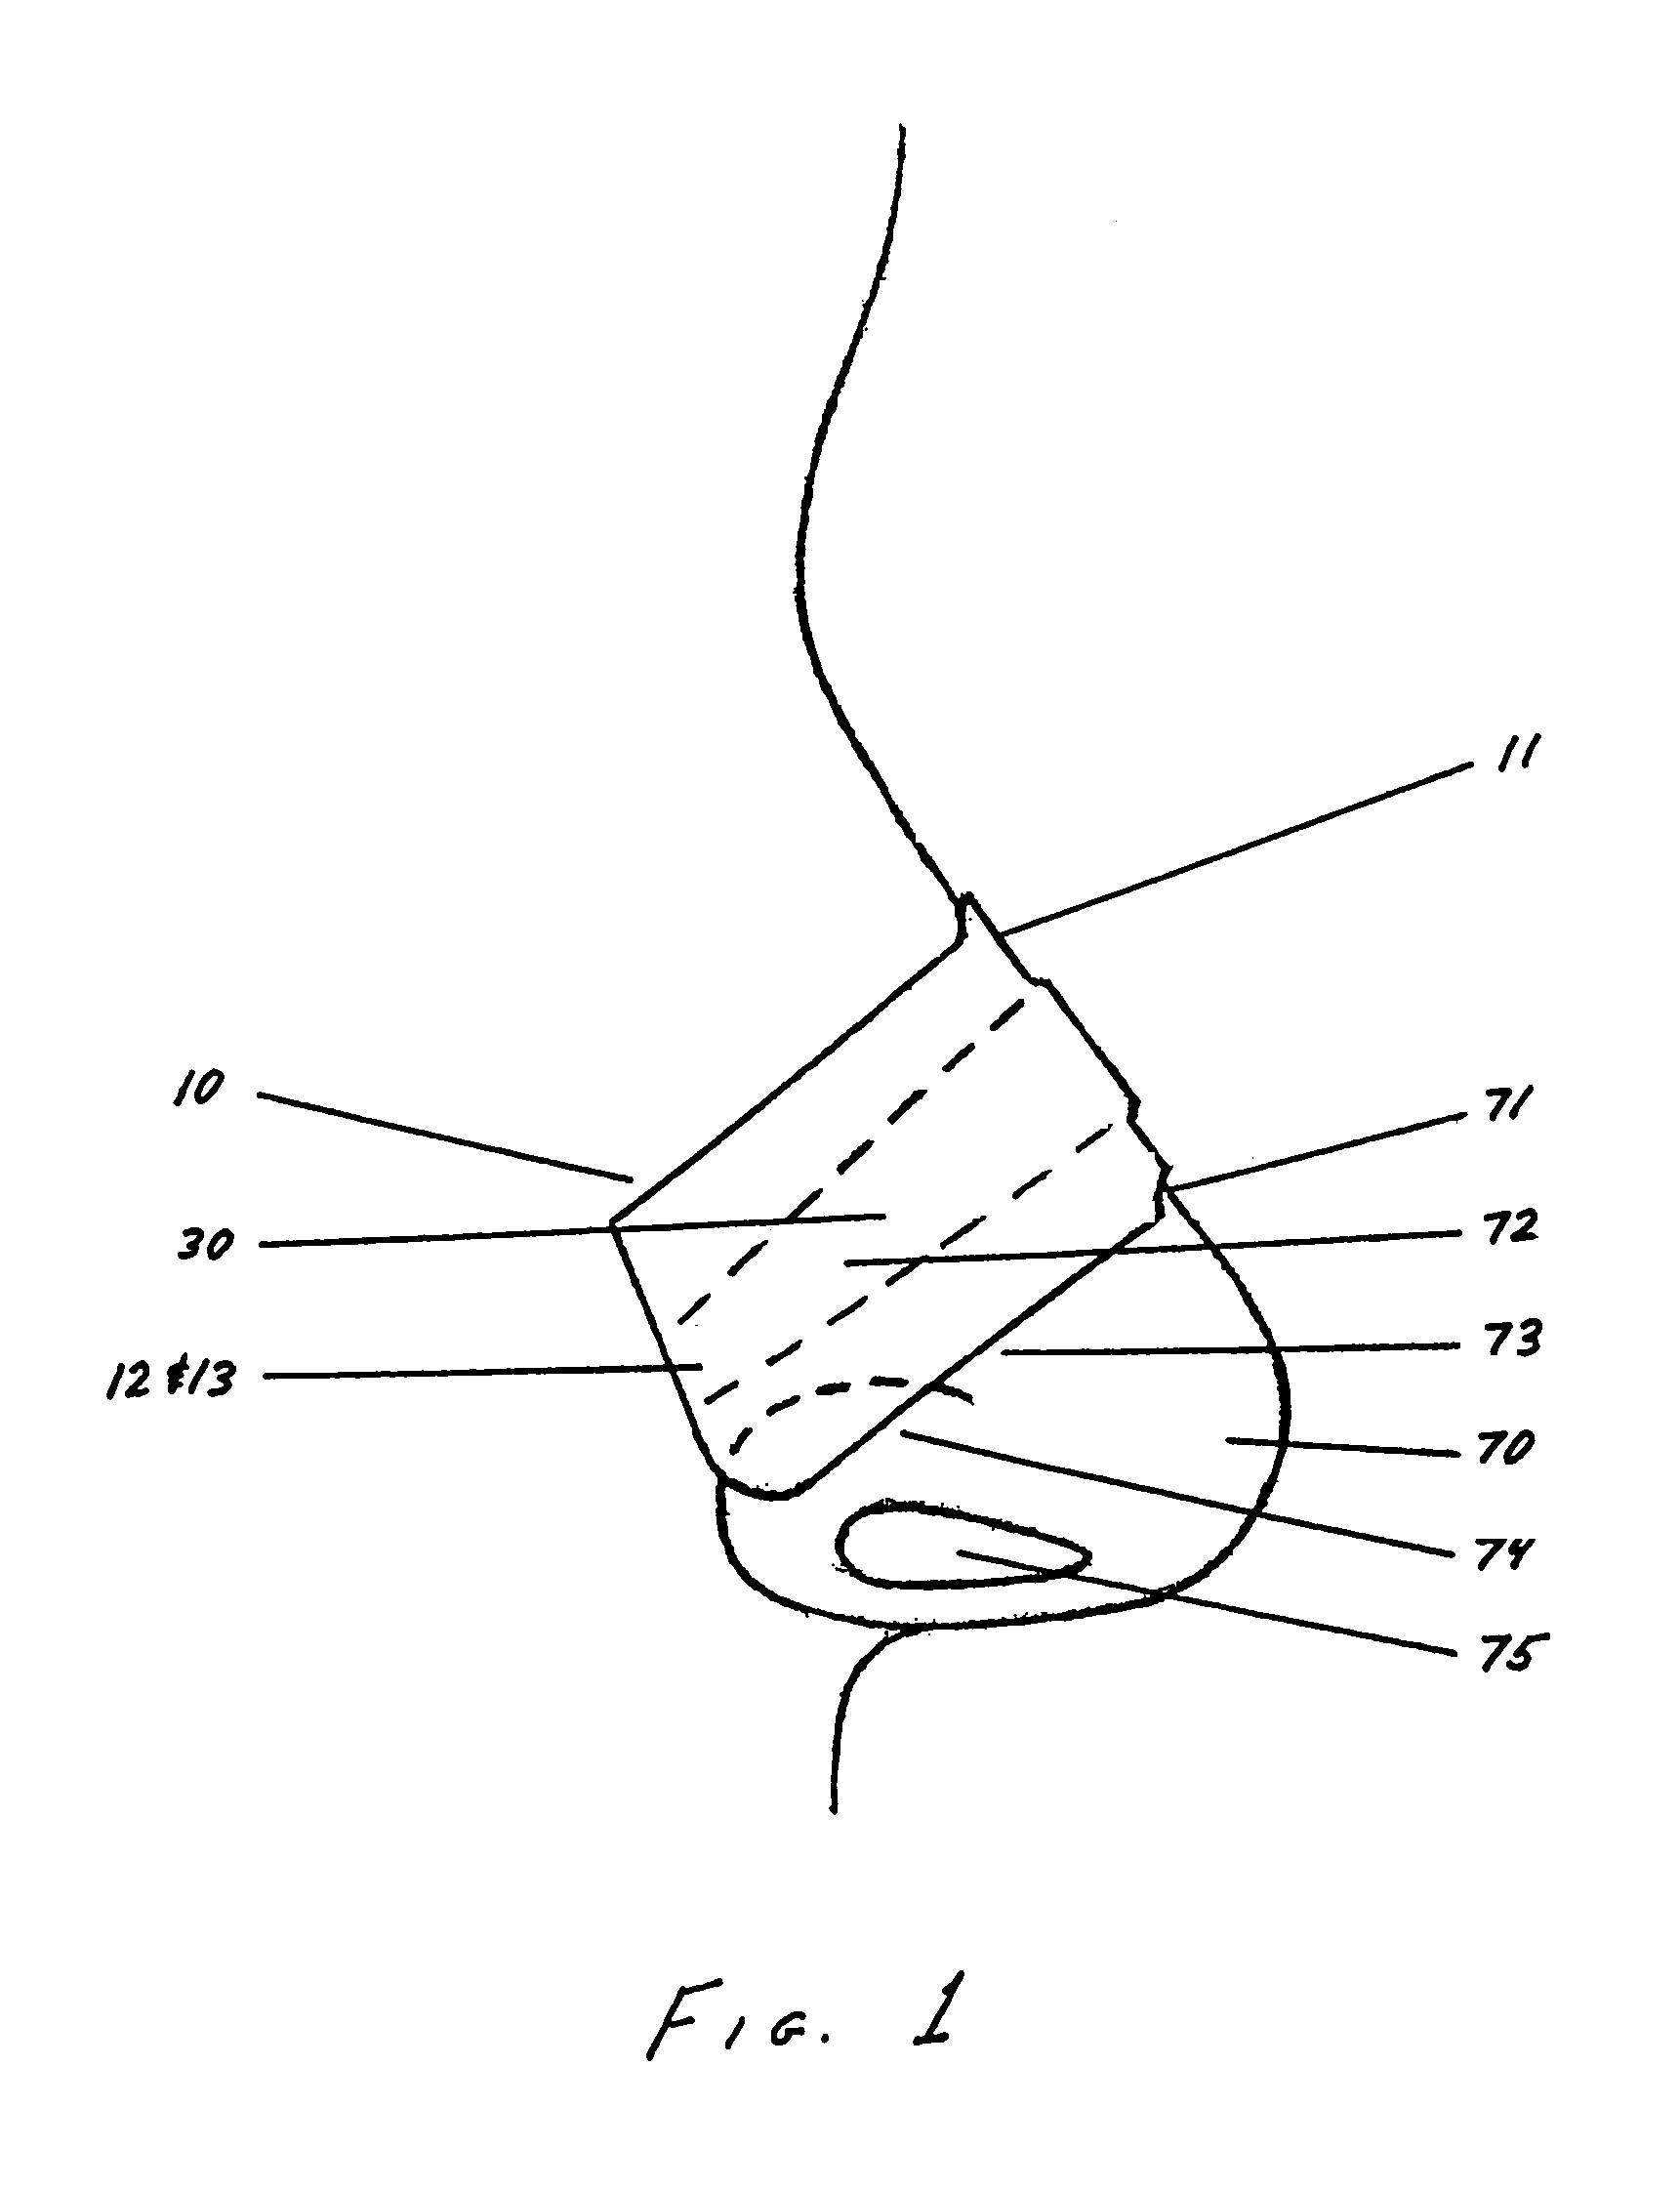 Nasal strip with variable spring rate